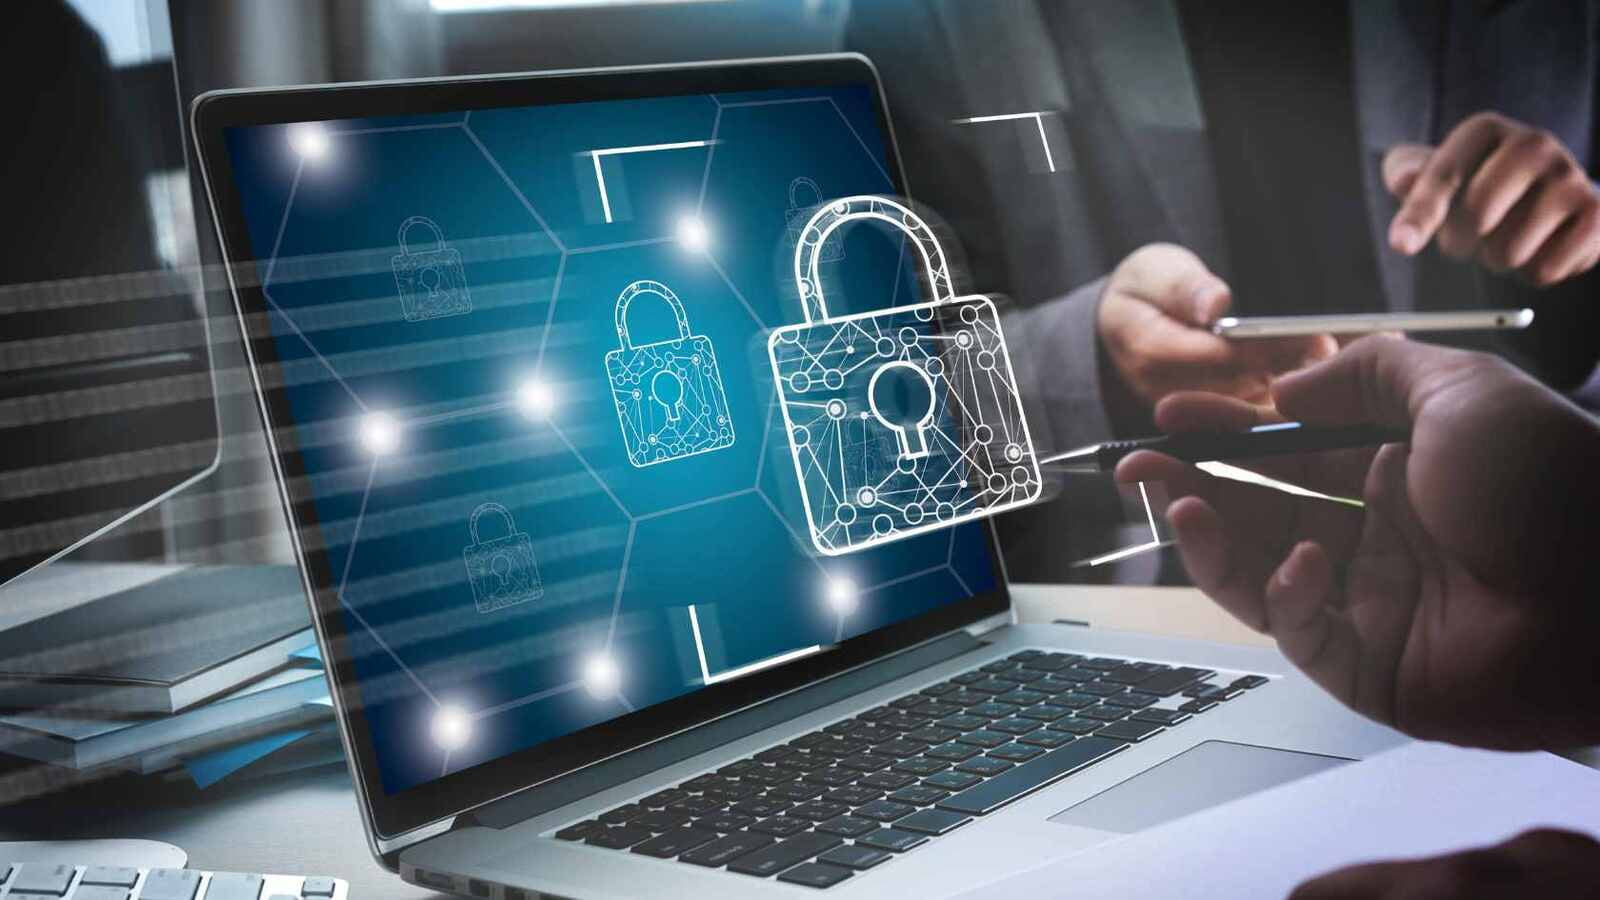 Lock popping out of laptop to signify cybersecurity